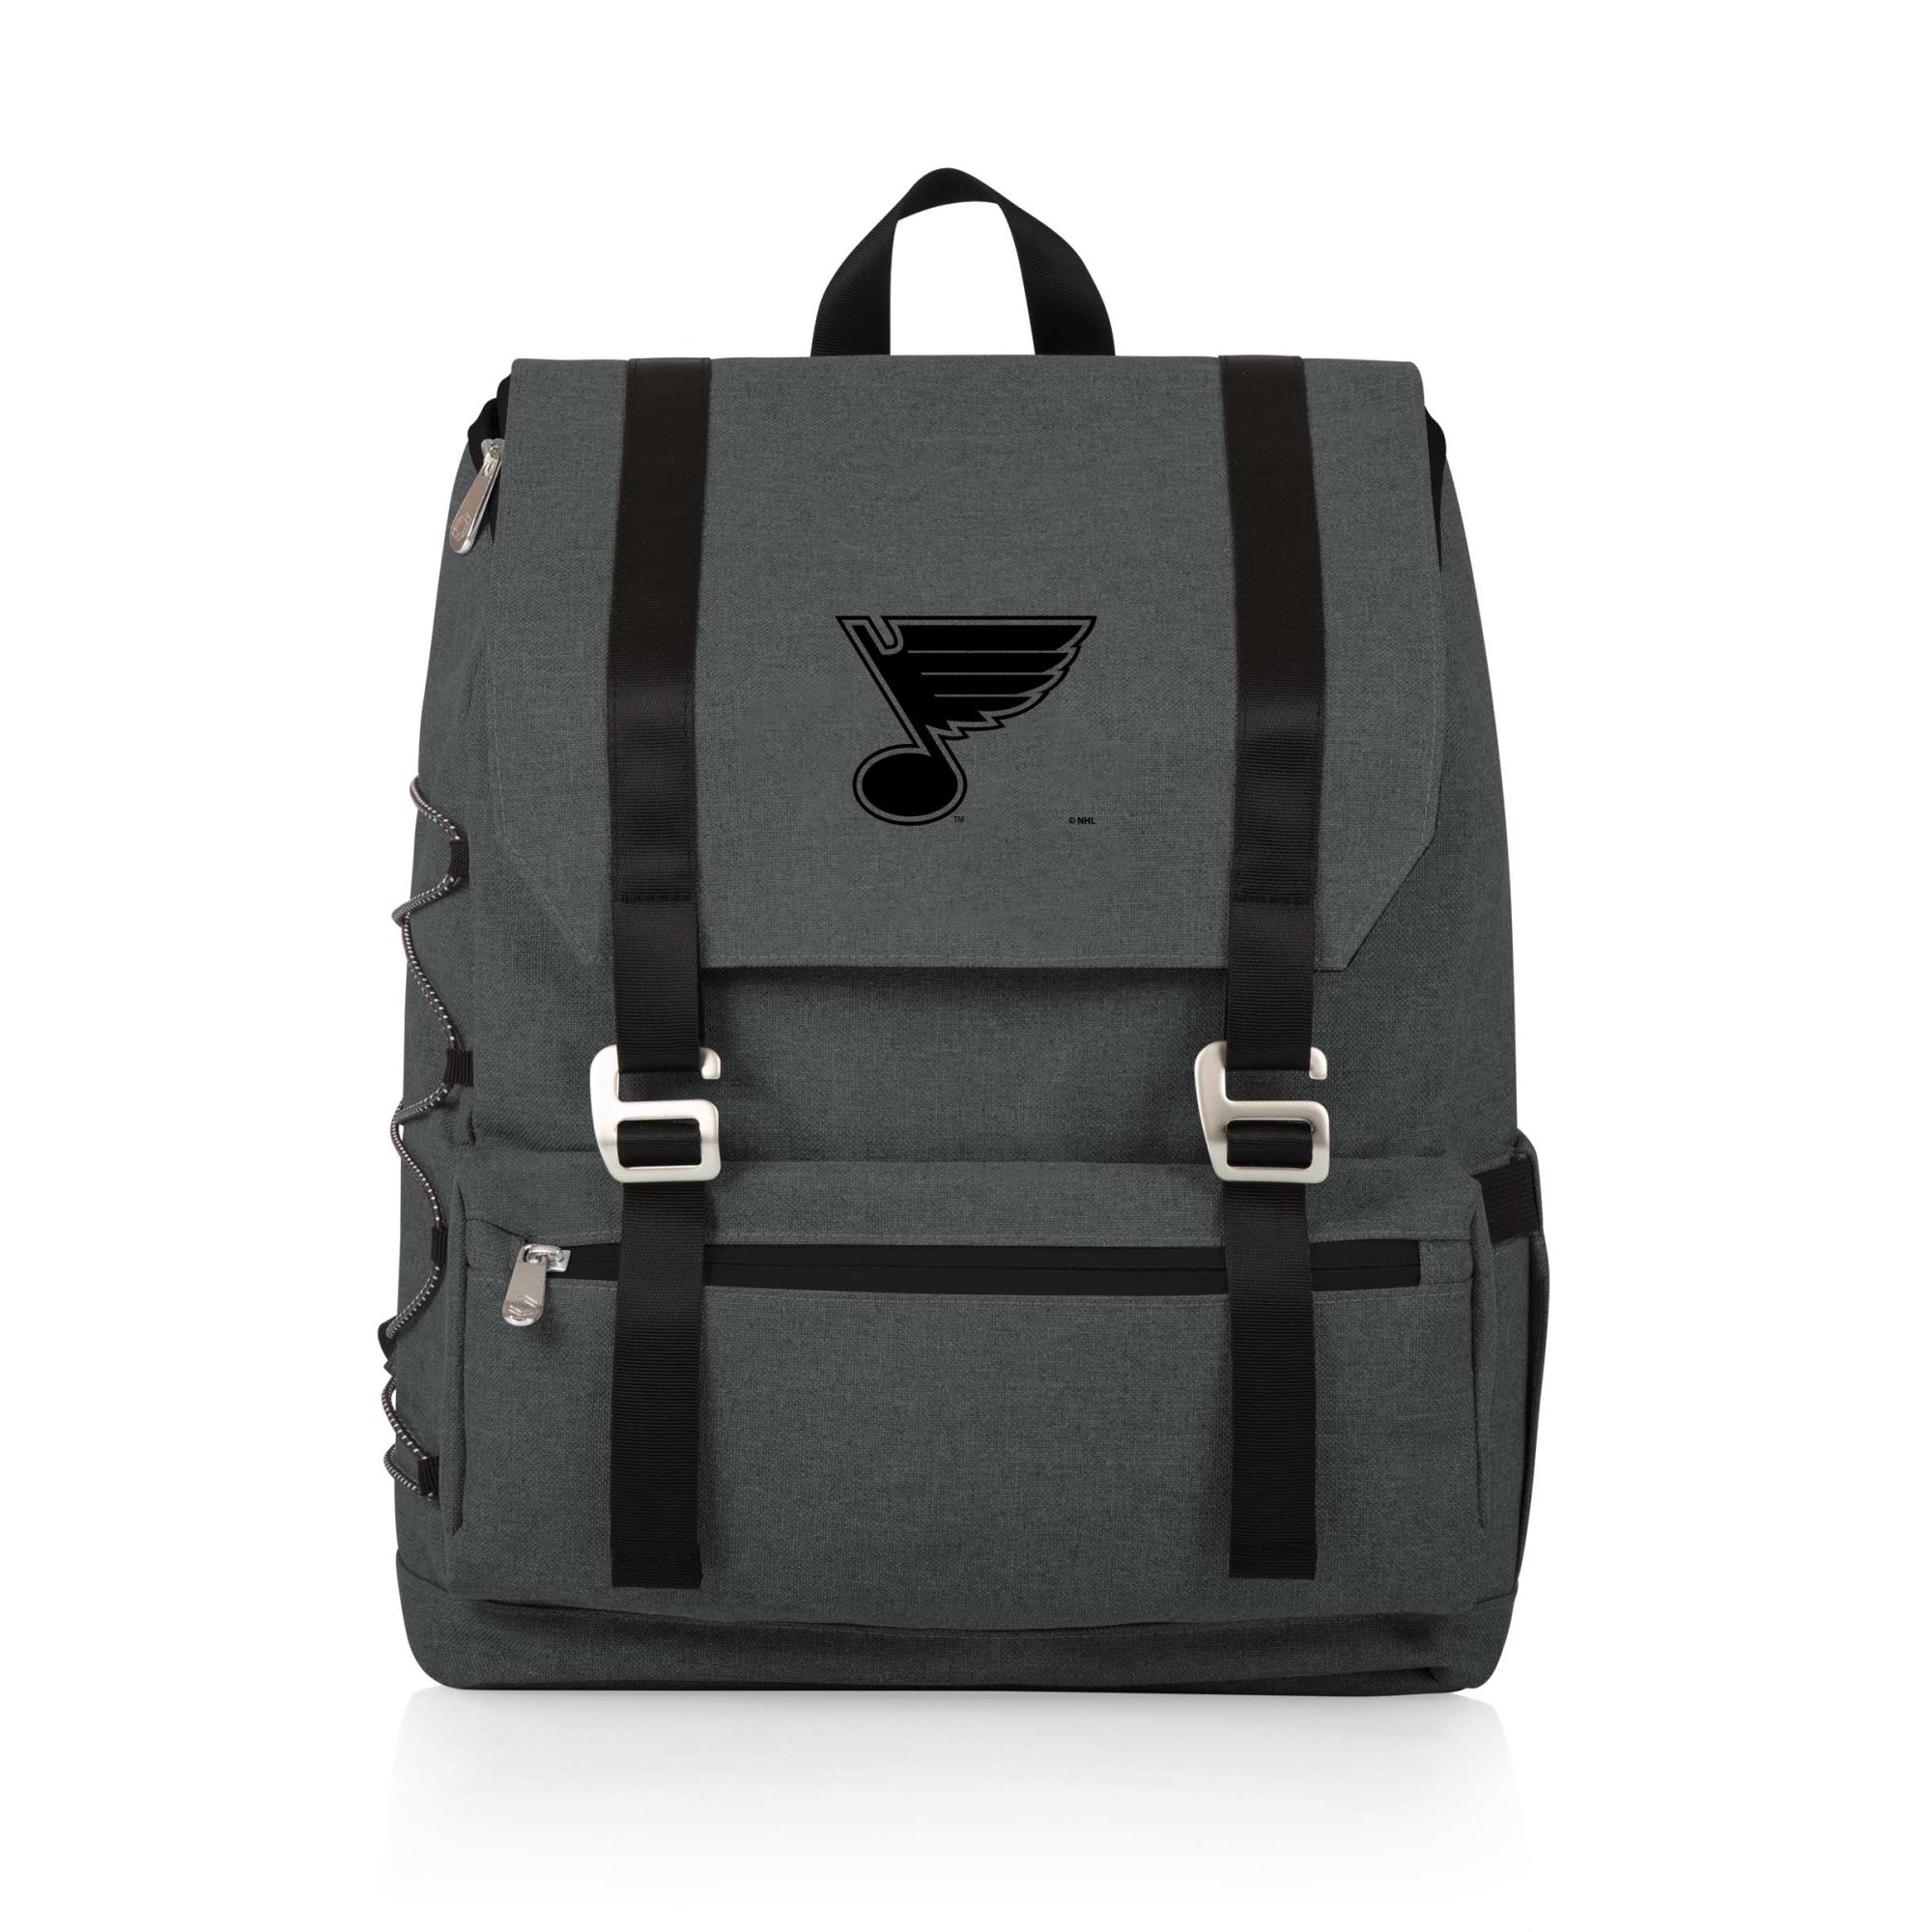 St Louis Blues - On The Go Traverse Backpack Cooler